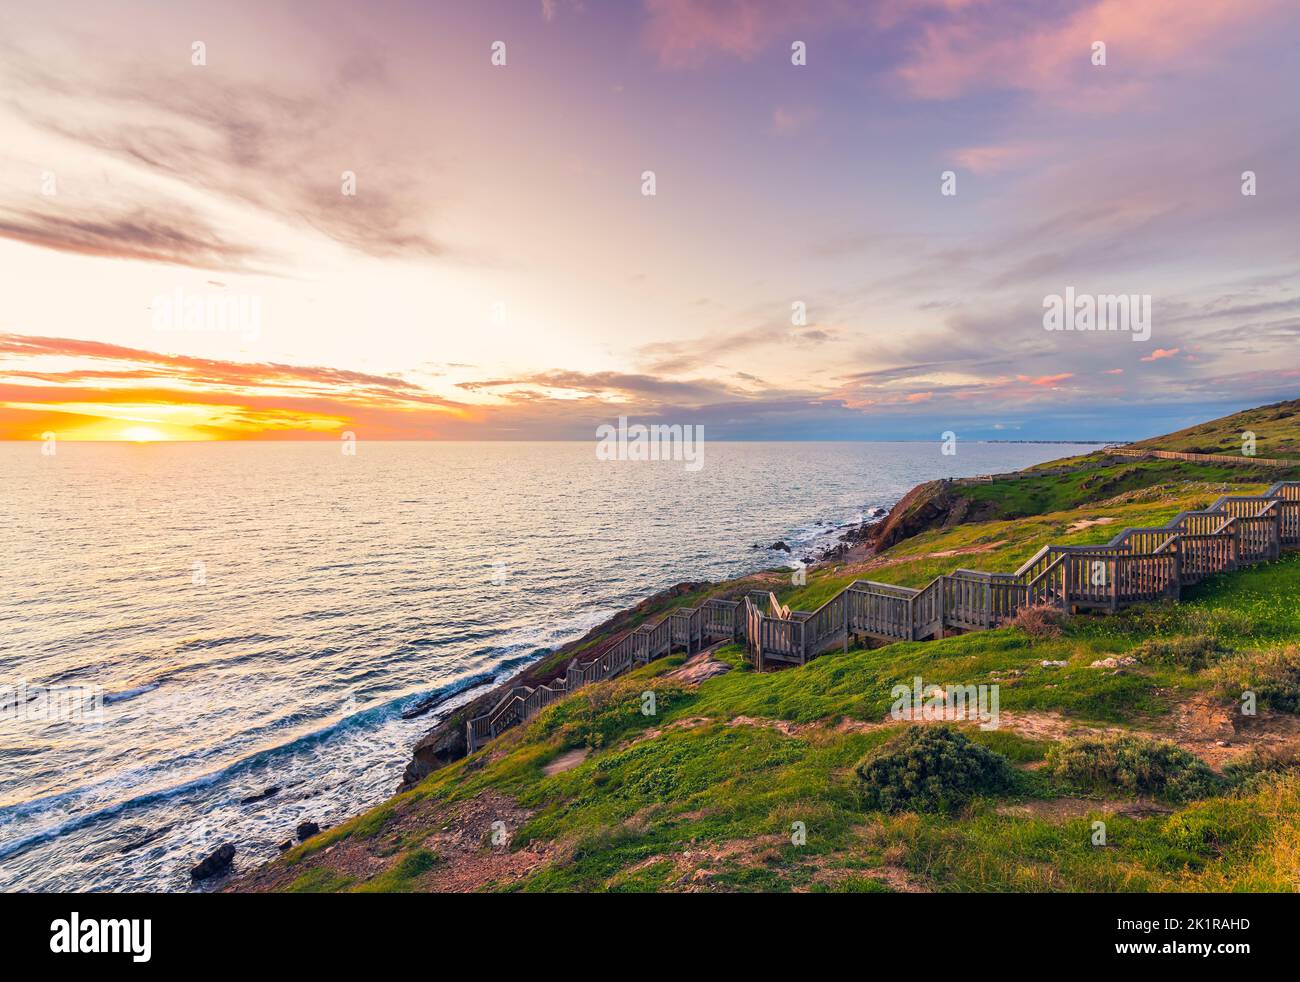 Hallett Cove boardwalk at sunset viewed from the lookout, South Australia Stock Photo